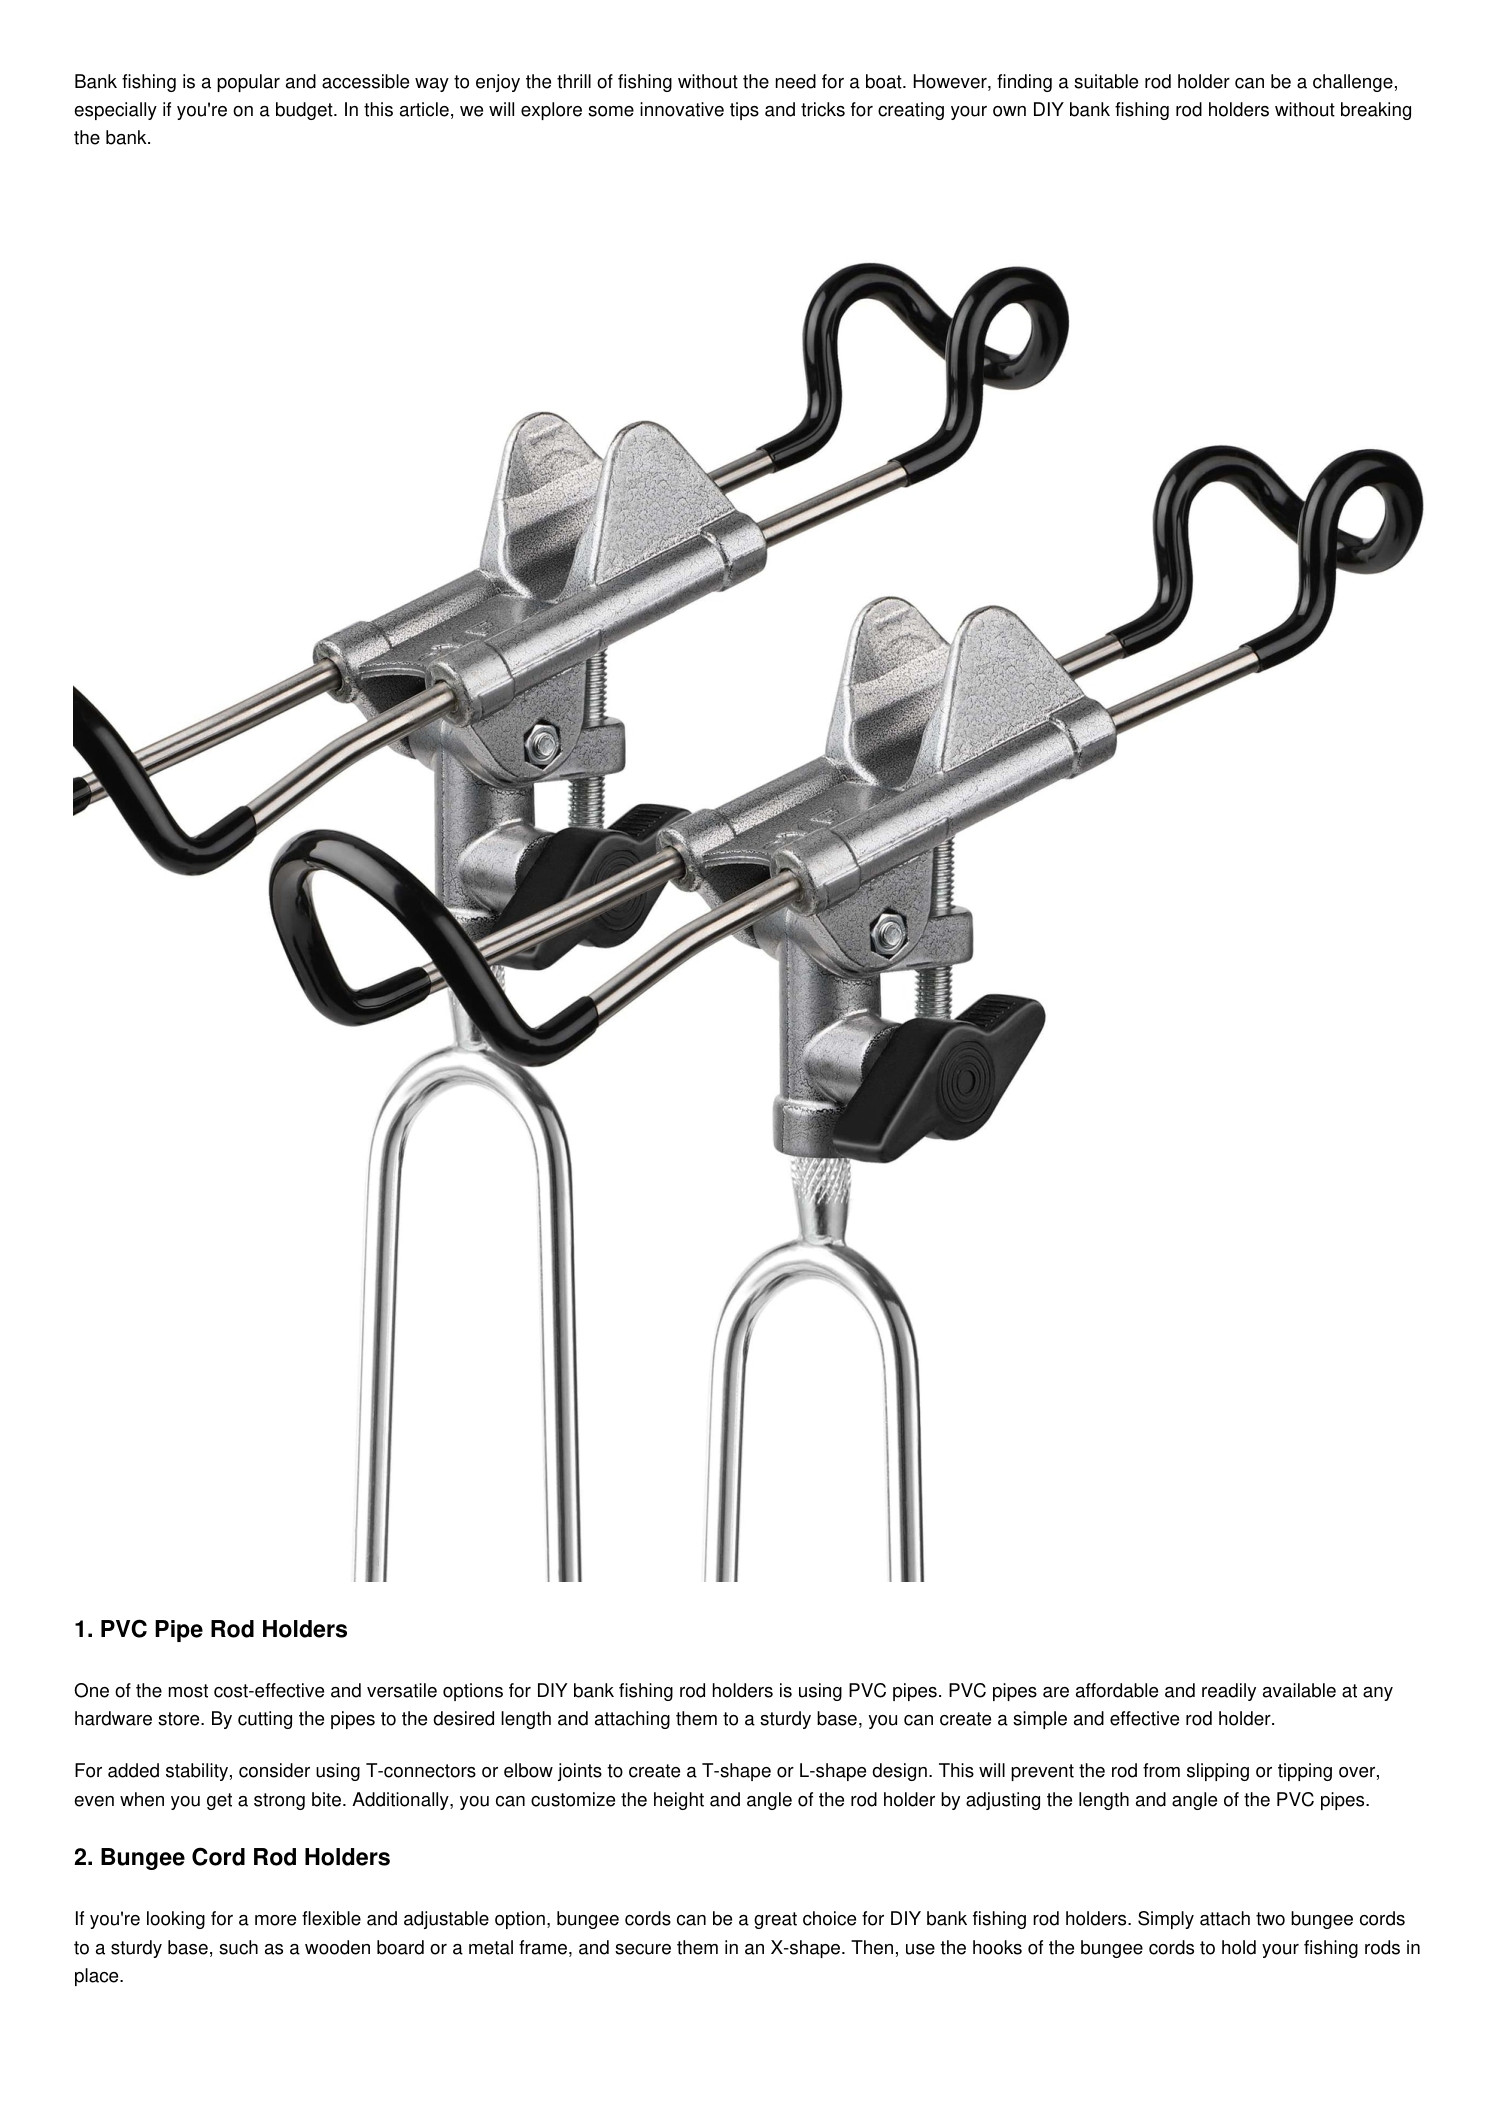 Tips and Tricks for DIY Bank Fishing Rod Holders on a Budget.pdf